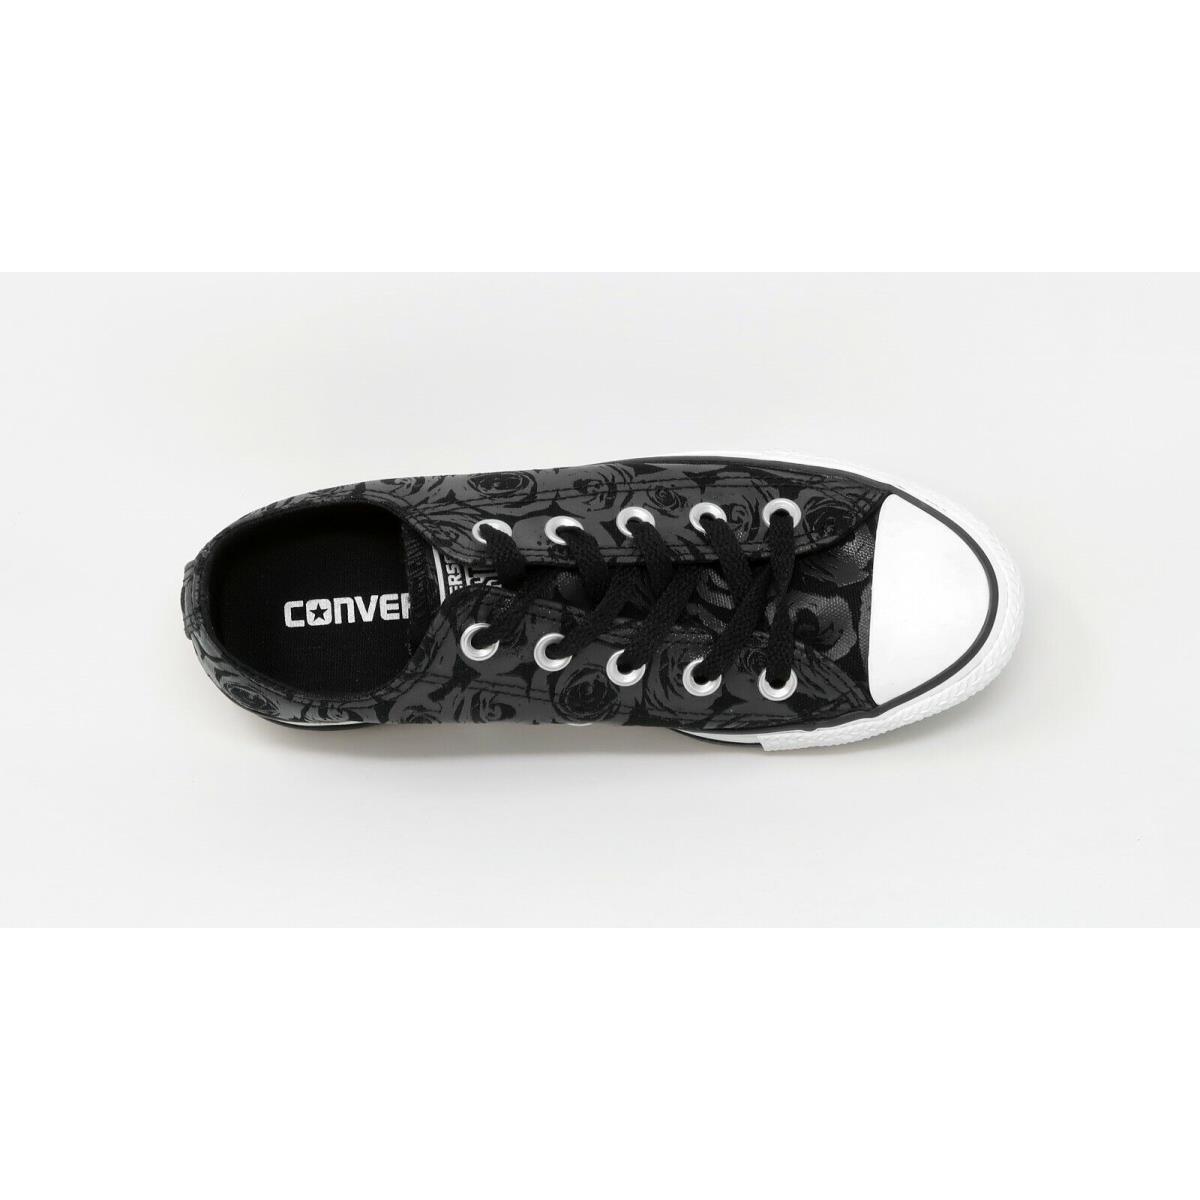 Converse All Star CT Ox Thunder Black Charcoal Print Women Shoes Sneakers |  081376688030 - Converse shoes - Black | SporTipTop